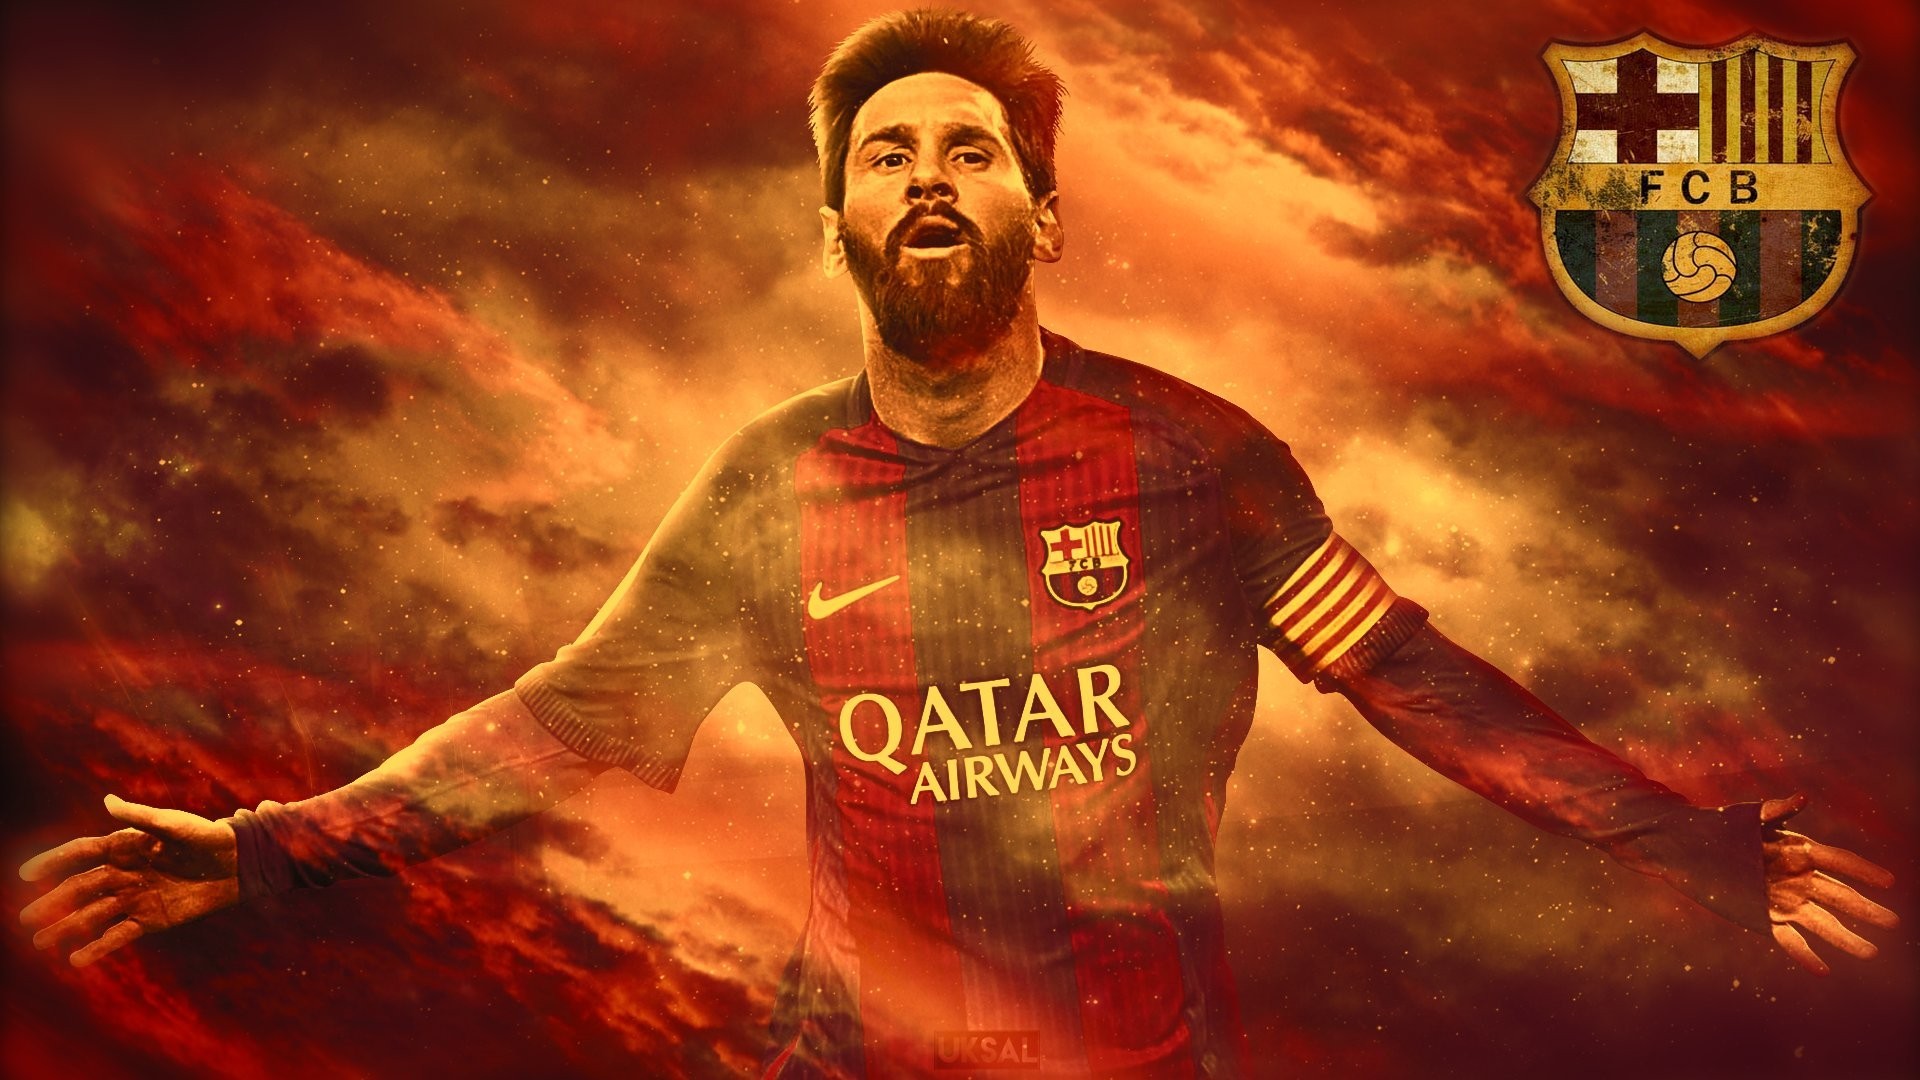 Lionel Messi Barcelona Wallpaper HD With Resolution 1920X1080 pixel. You can make this wallpaper for your Mac or Windows Desktop Background, iPhone, Android or Tablet and another Smartphone device for free